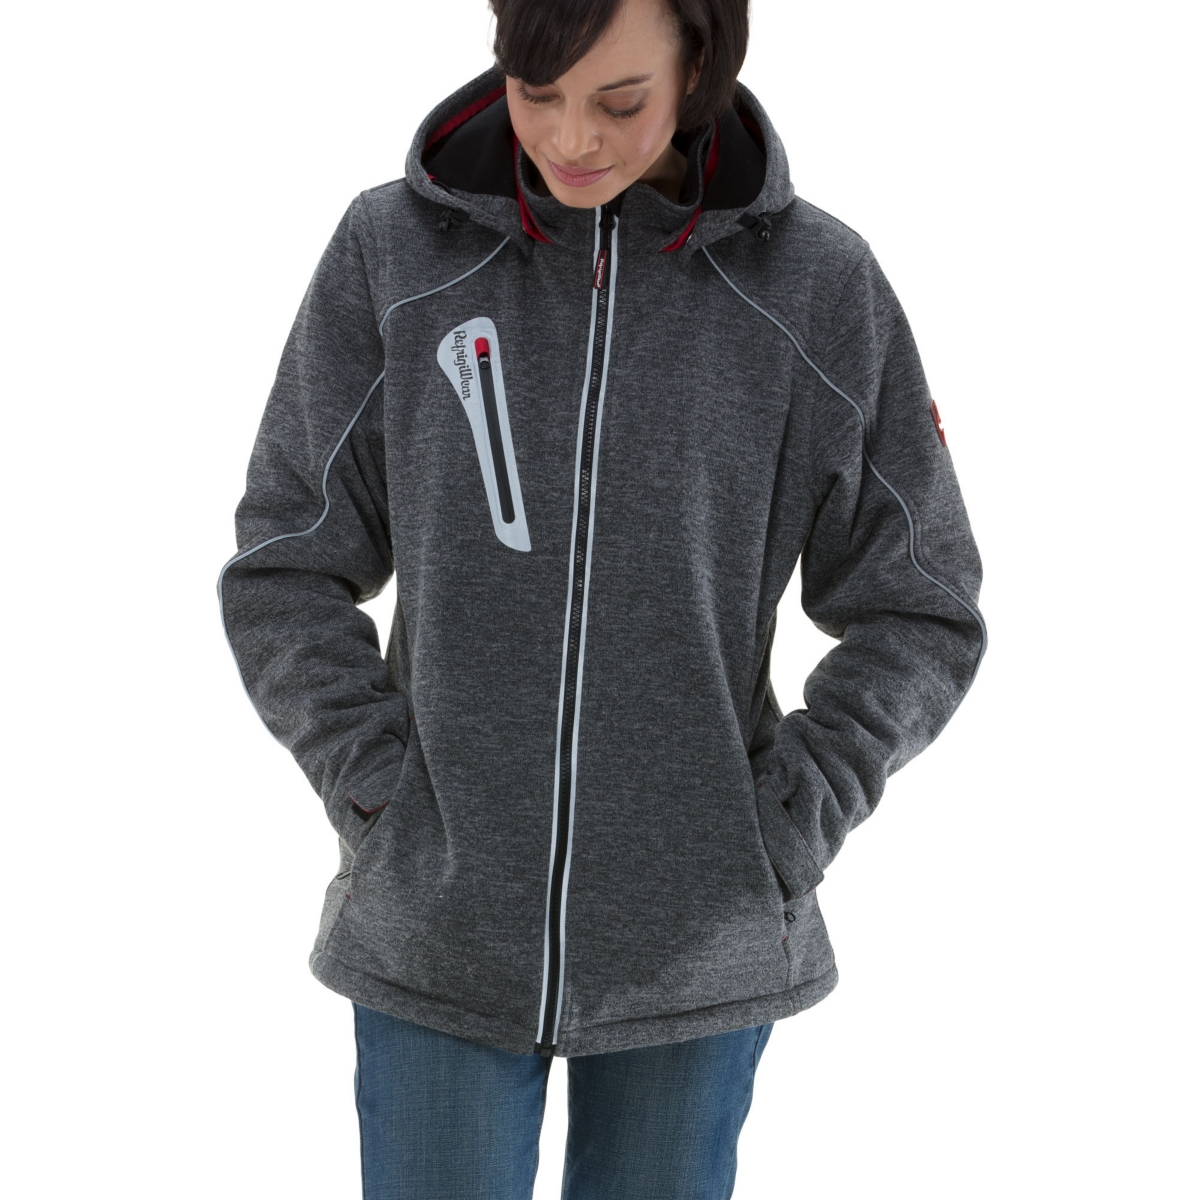 Plus Size Fleece Lined Extreme Sweater Jacket with Removable Hood - Grey